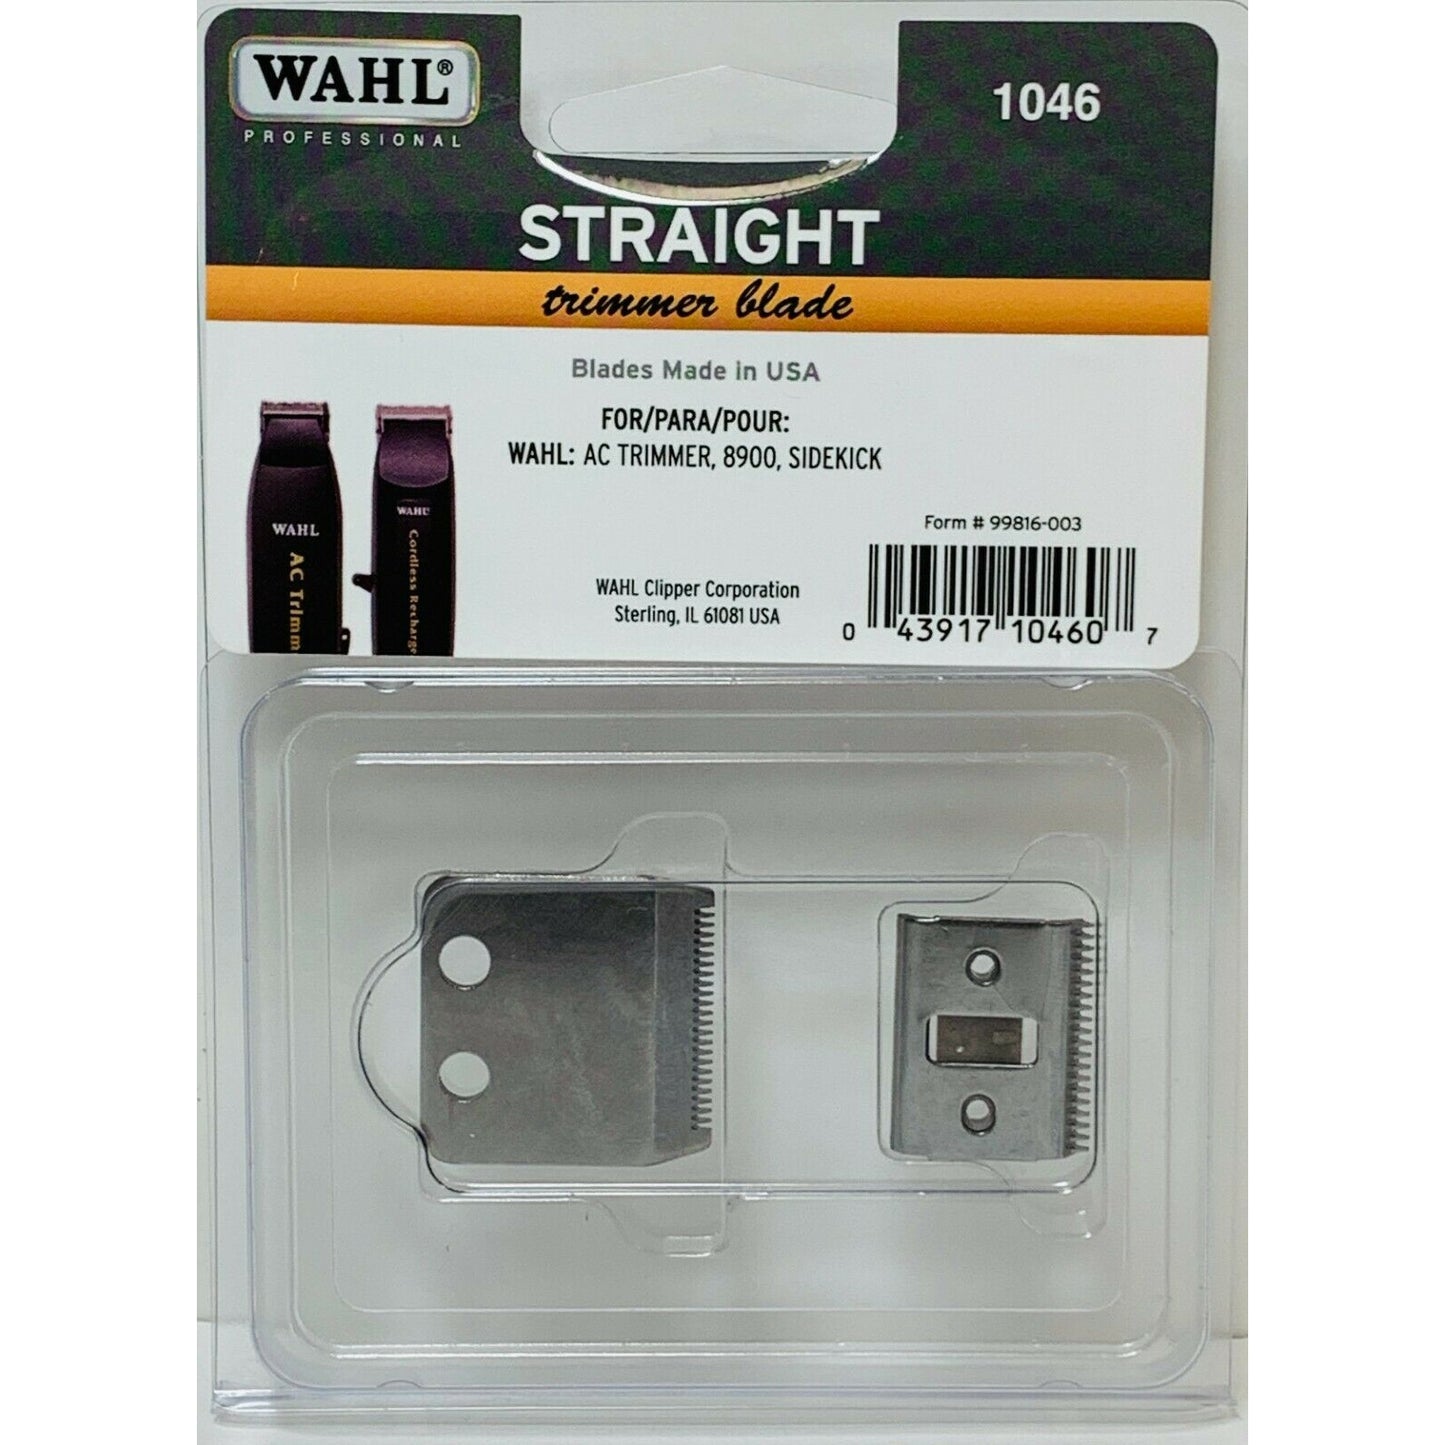 Wahl Straight Trimmer Blade 2-Hole Blade For 8900 Sidekick AC Trimmer #1046